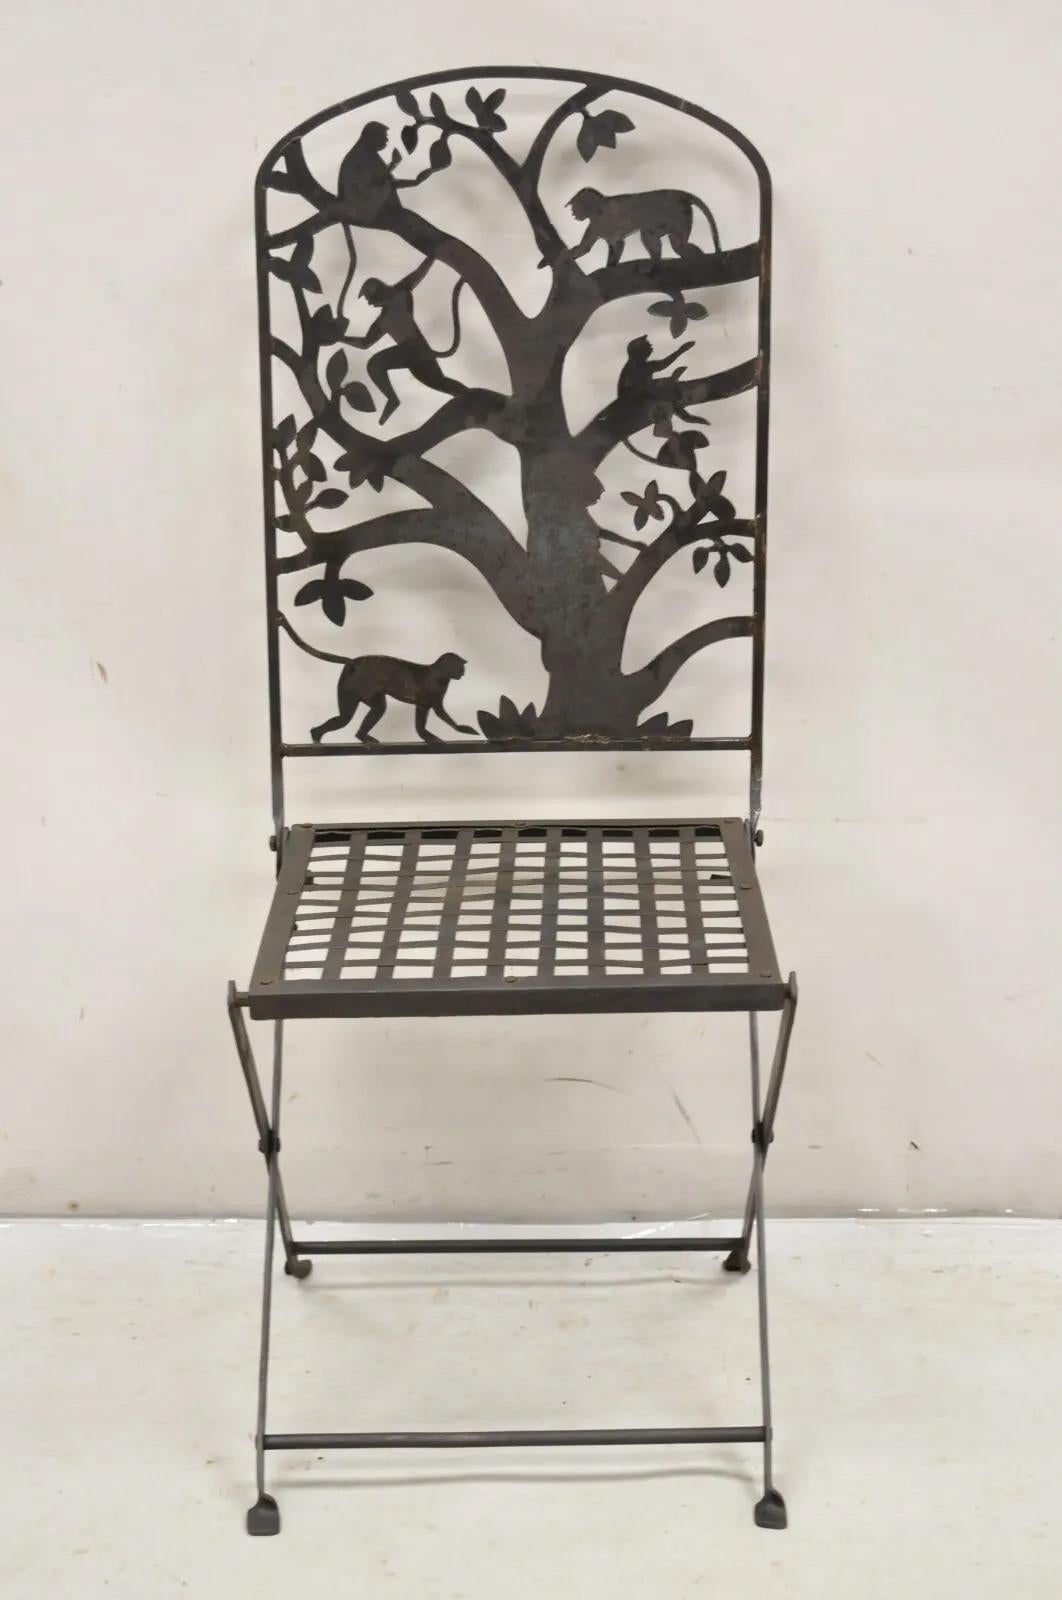 Vintage Wrought Iron Figural Monkeys In Tree Folding Garden Accent Chair. Item features a folding frame, weathered rustic finish, unique vintage chair. Circa  Mid to Late 20th Century. Measurements: 42